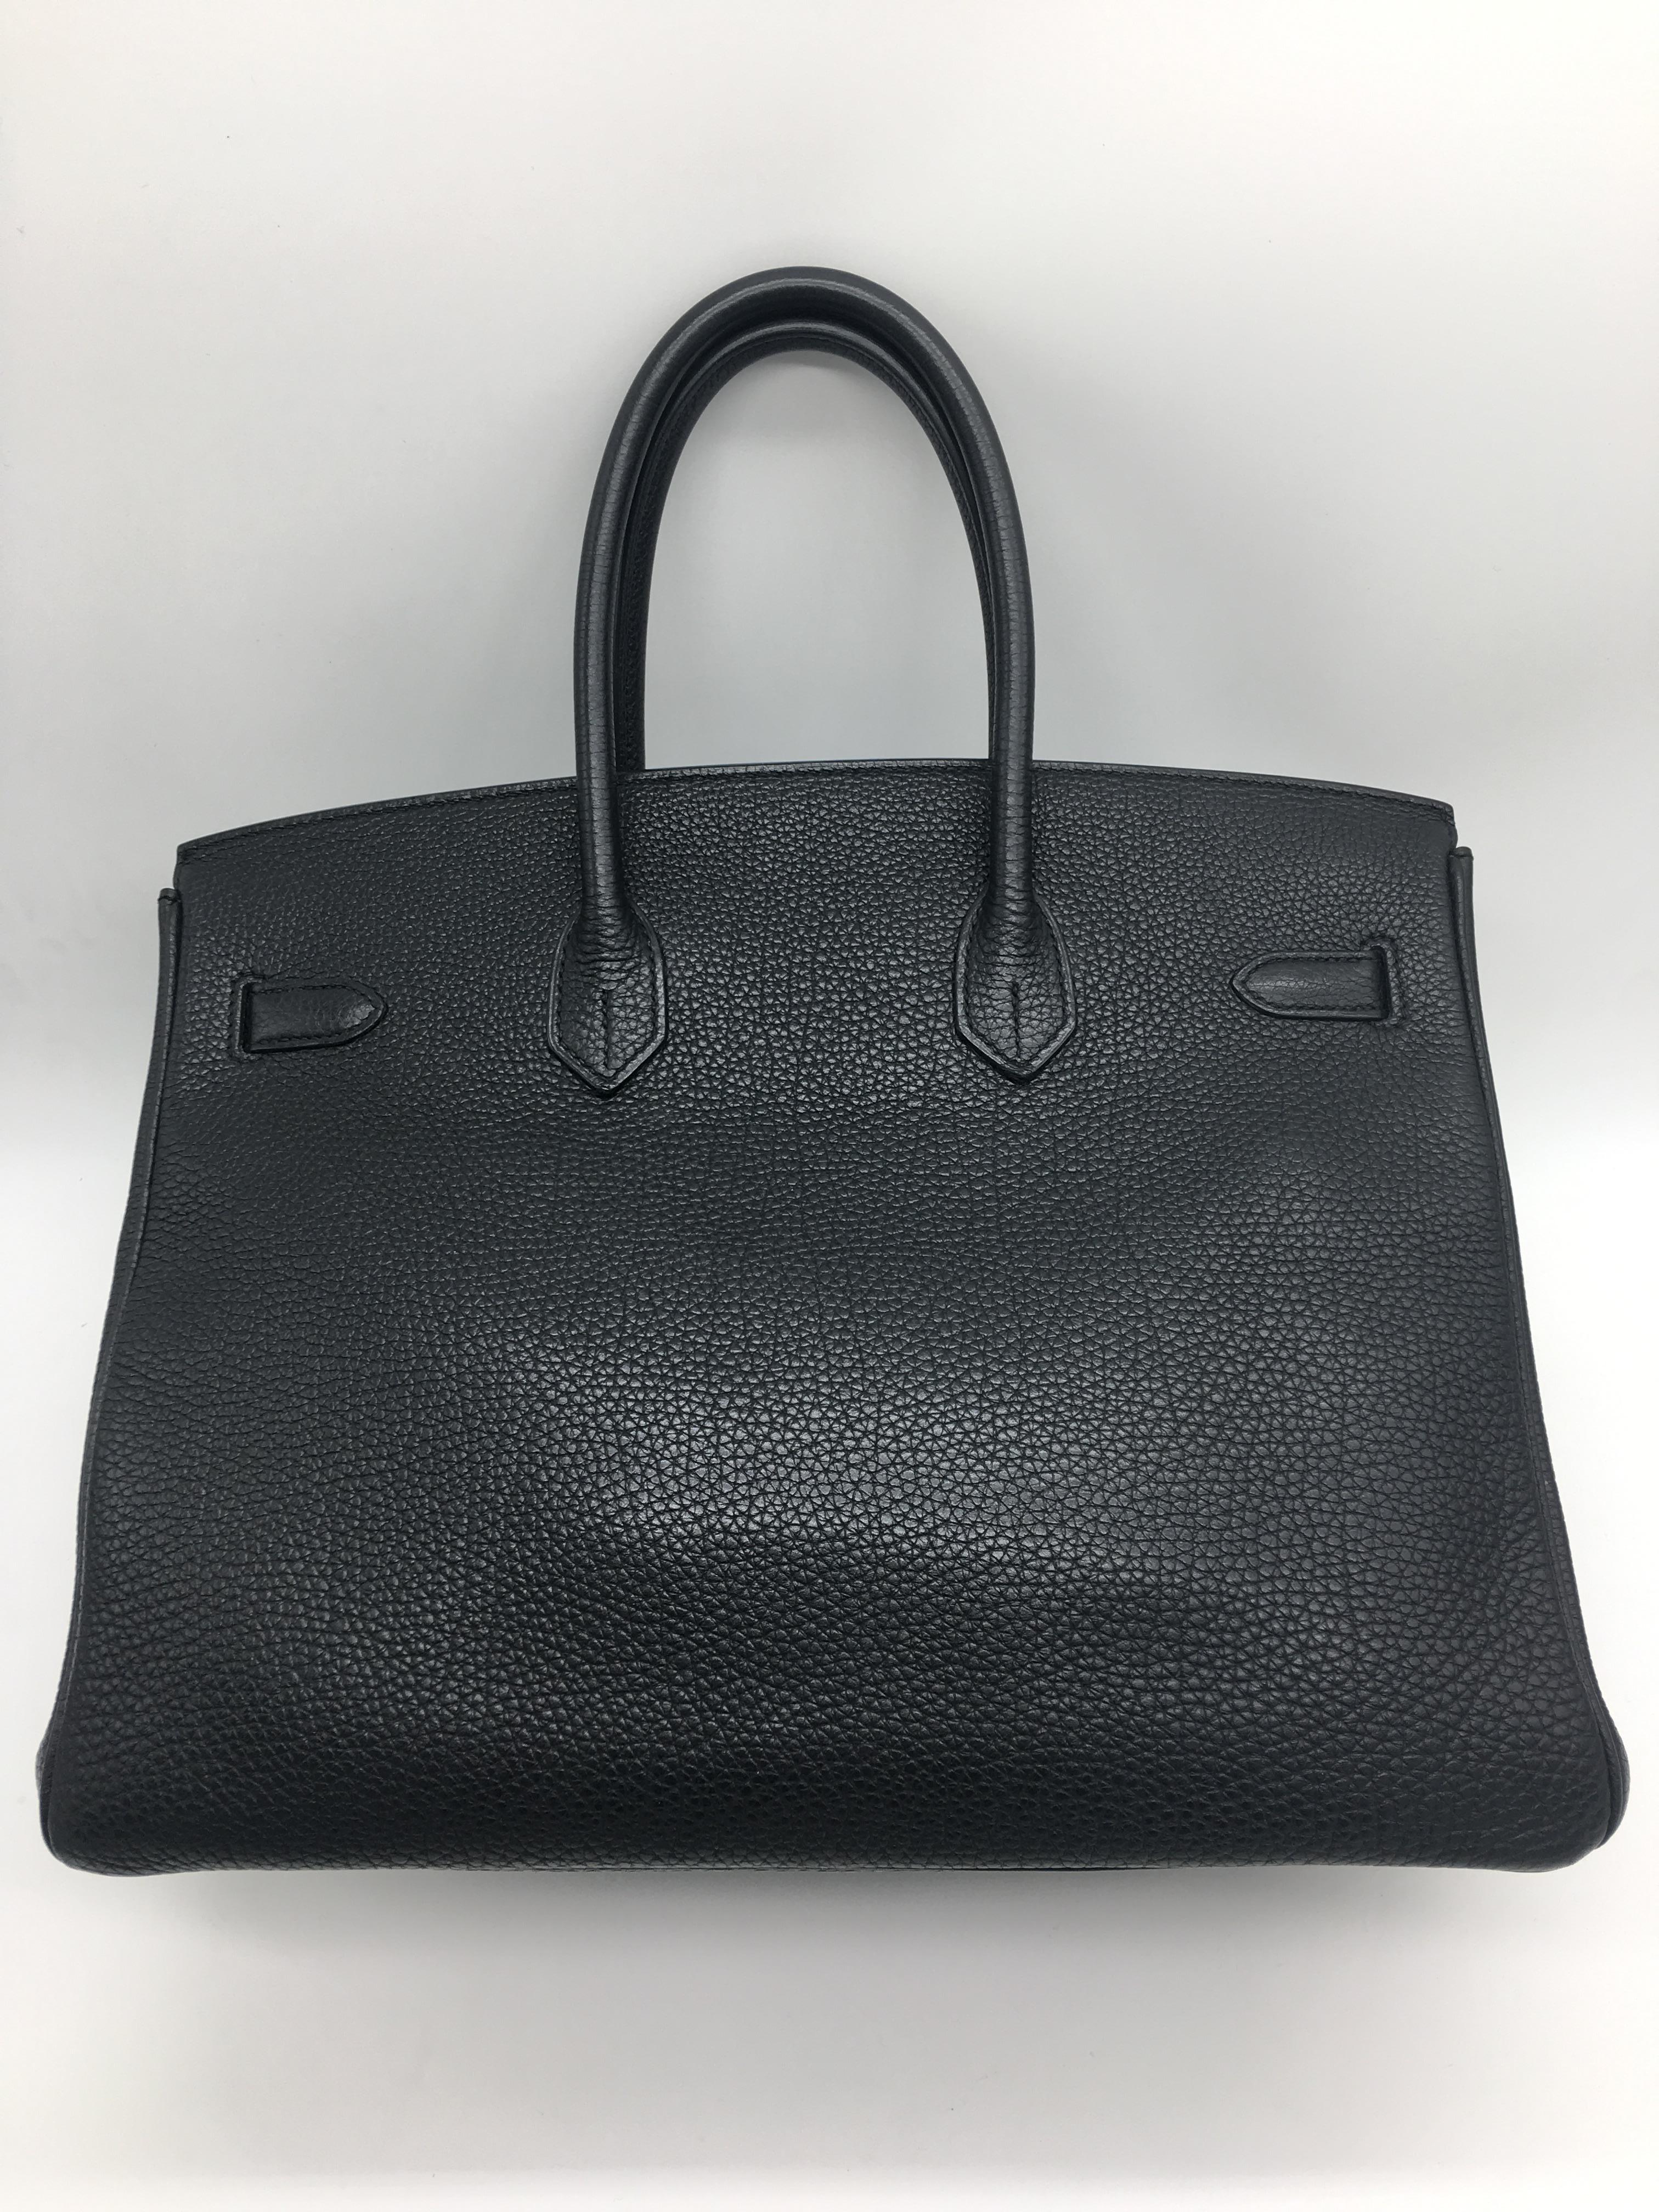 A 35cm black Hermes Birkin handbag in Togo Leather with Palladium Hardware. The classic bag for absolute elegance!  Full measurements are 35cm x 25cm high x 18cm deep. The handles are 10cm high.
It's in excellent condition, the only signs of use